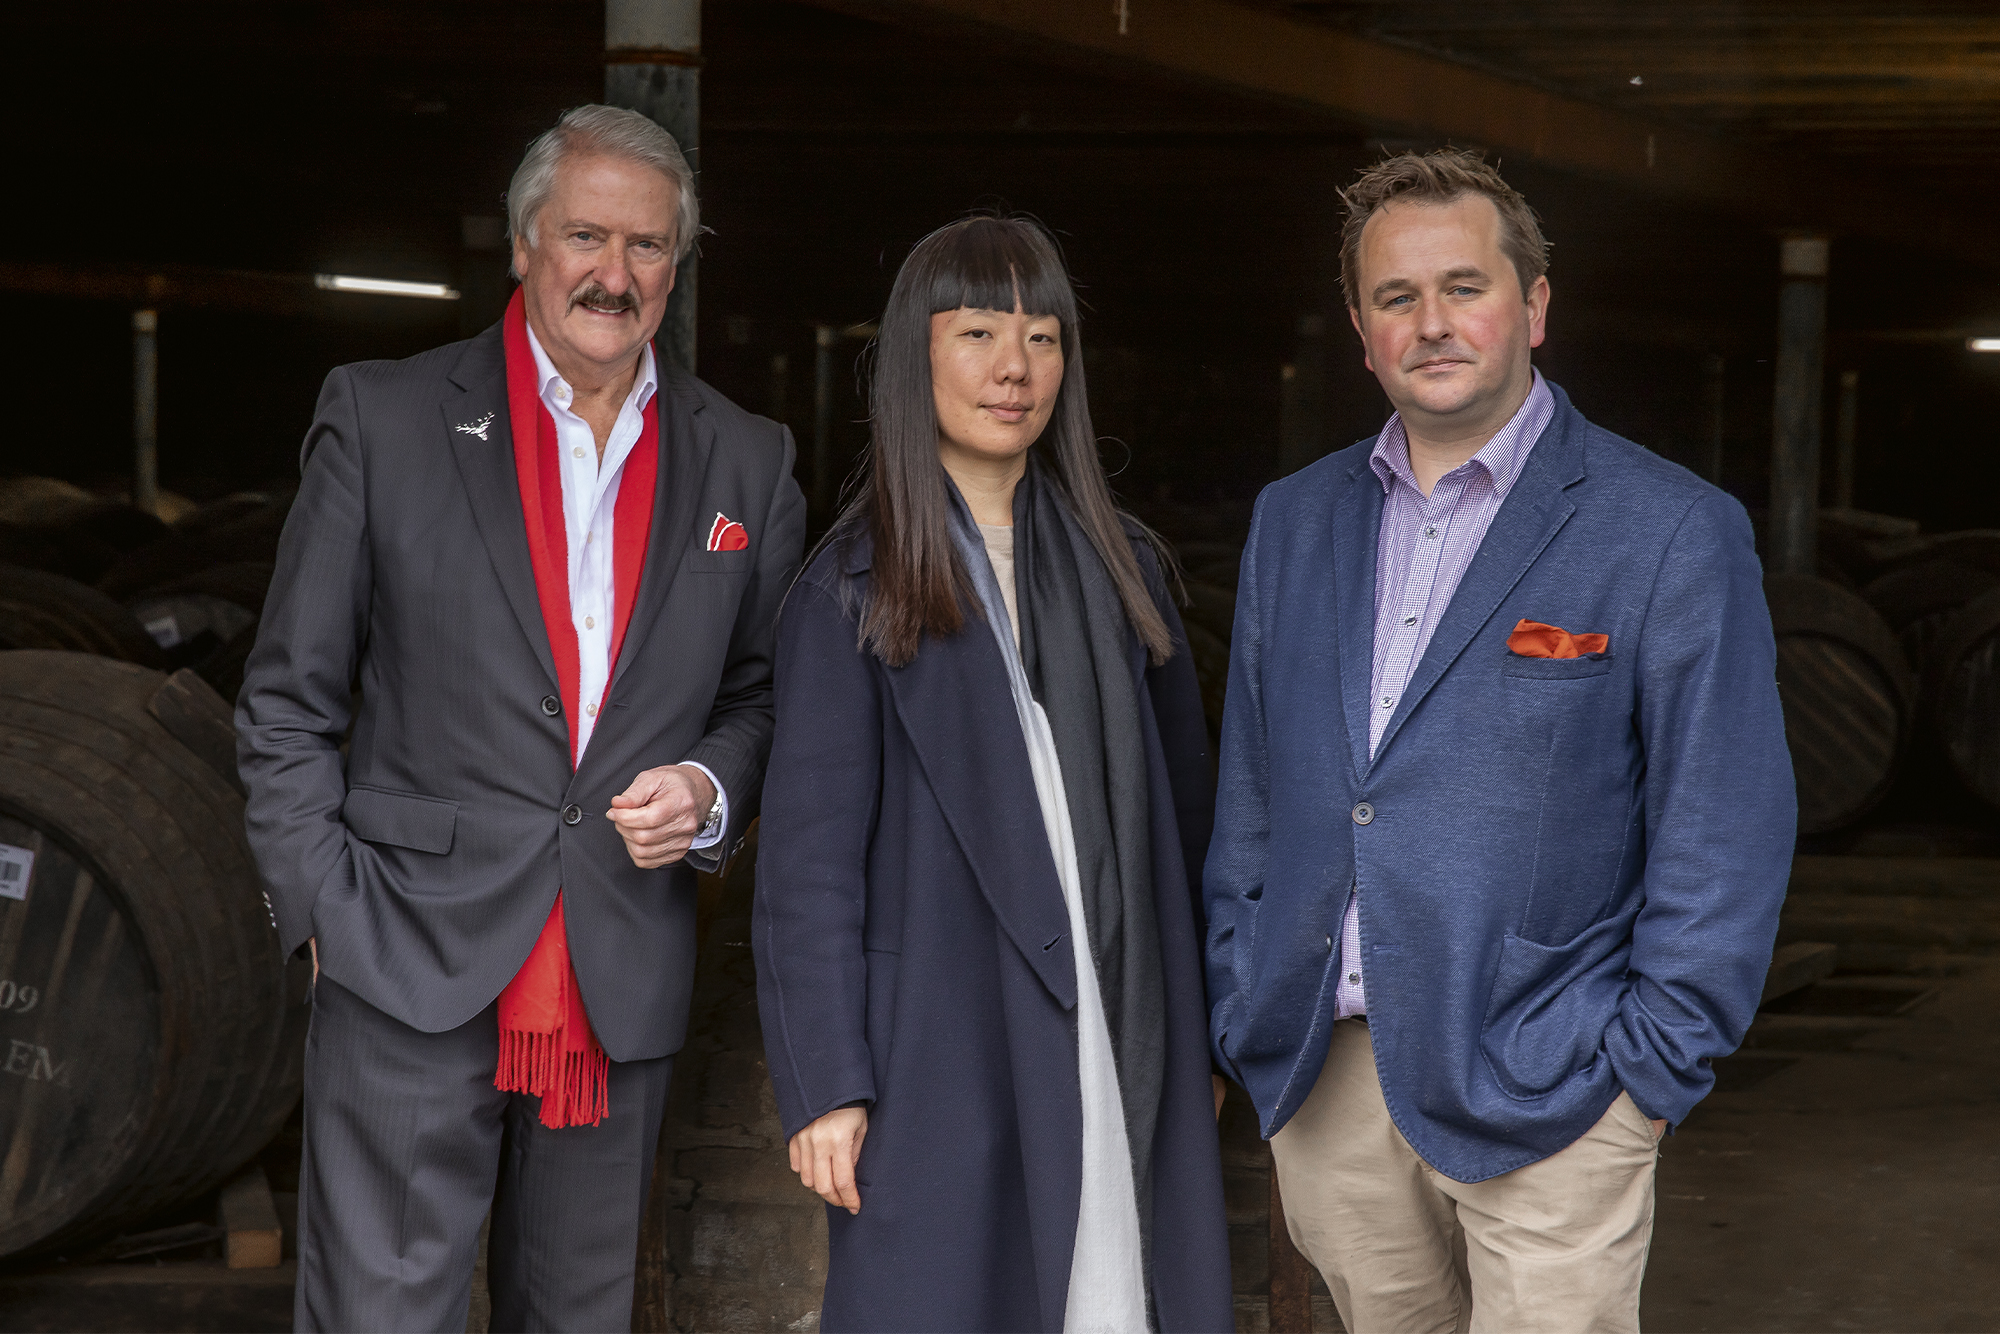 When Impossible Turns Rare: The Dalmore Luminary Series. Left to right: Richard Dalmore, Melodie Leung, and Gregg Glass